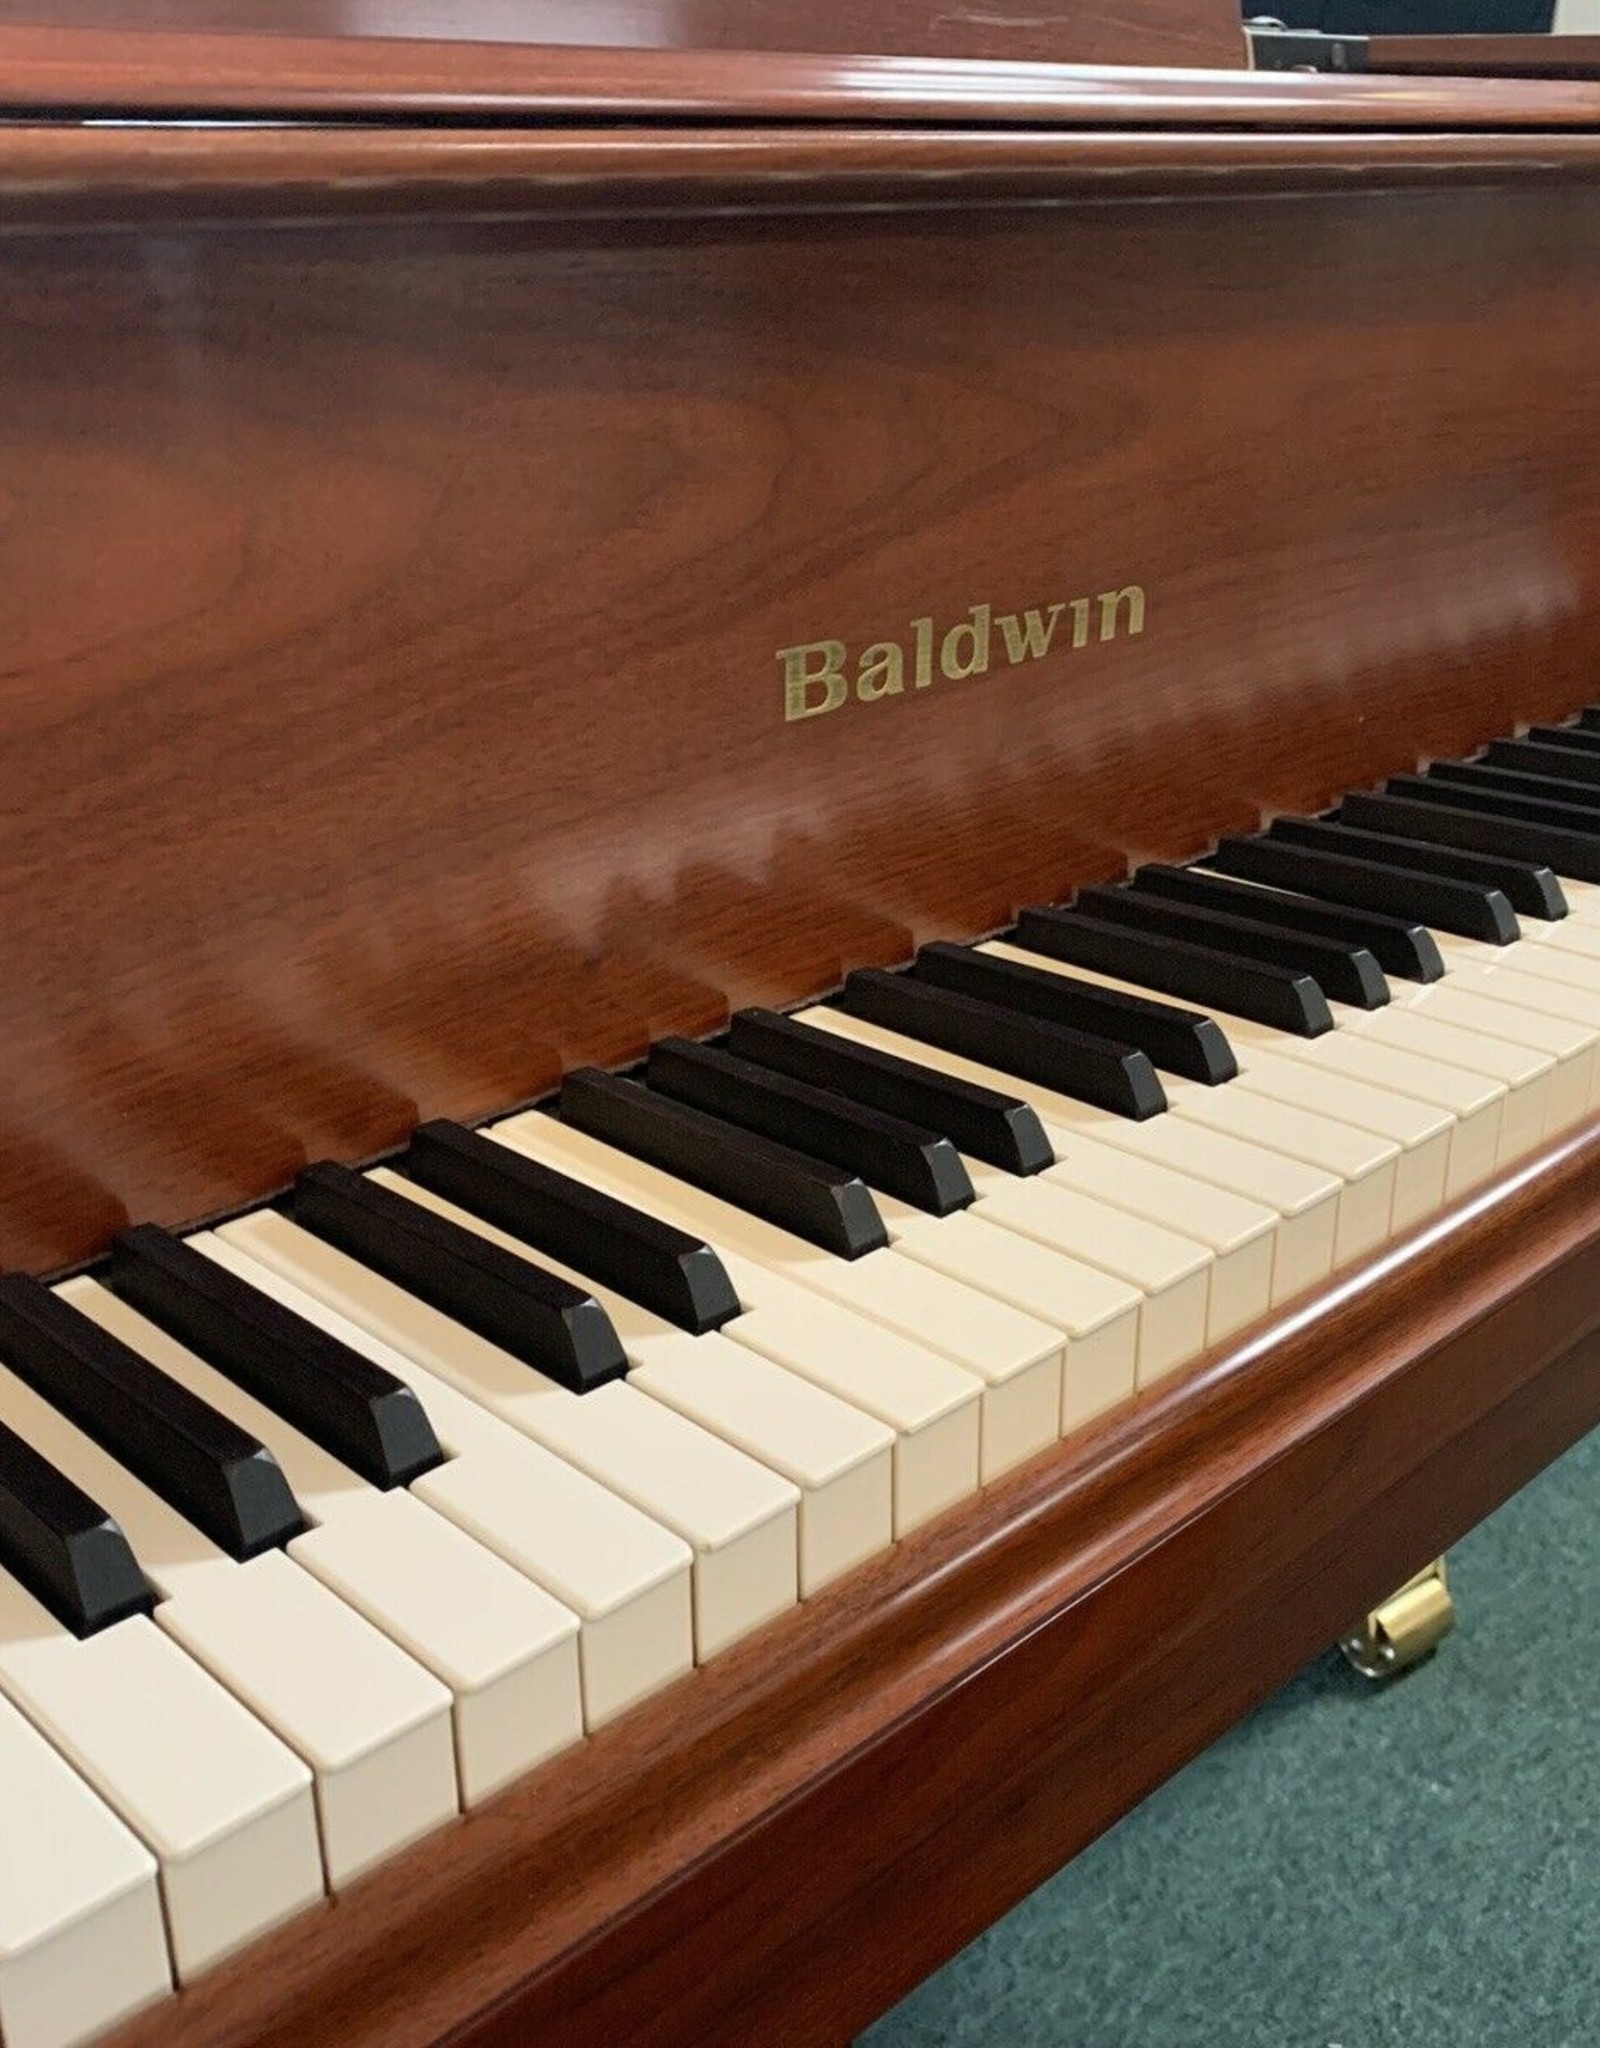 Baldwin Baldwin “Model R” 5’8” Grand Piano With ConcertMaster Player(Walnut) (pre-owned)